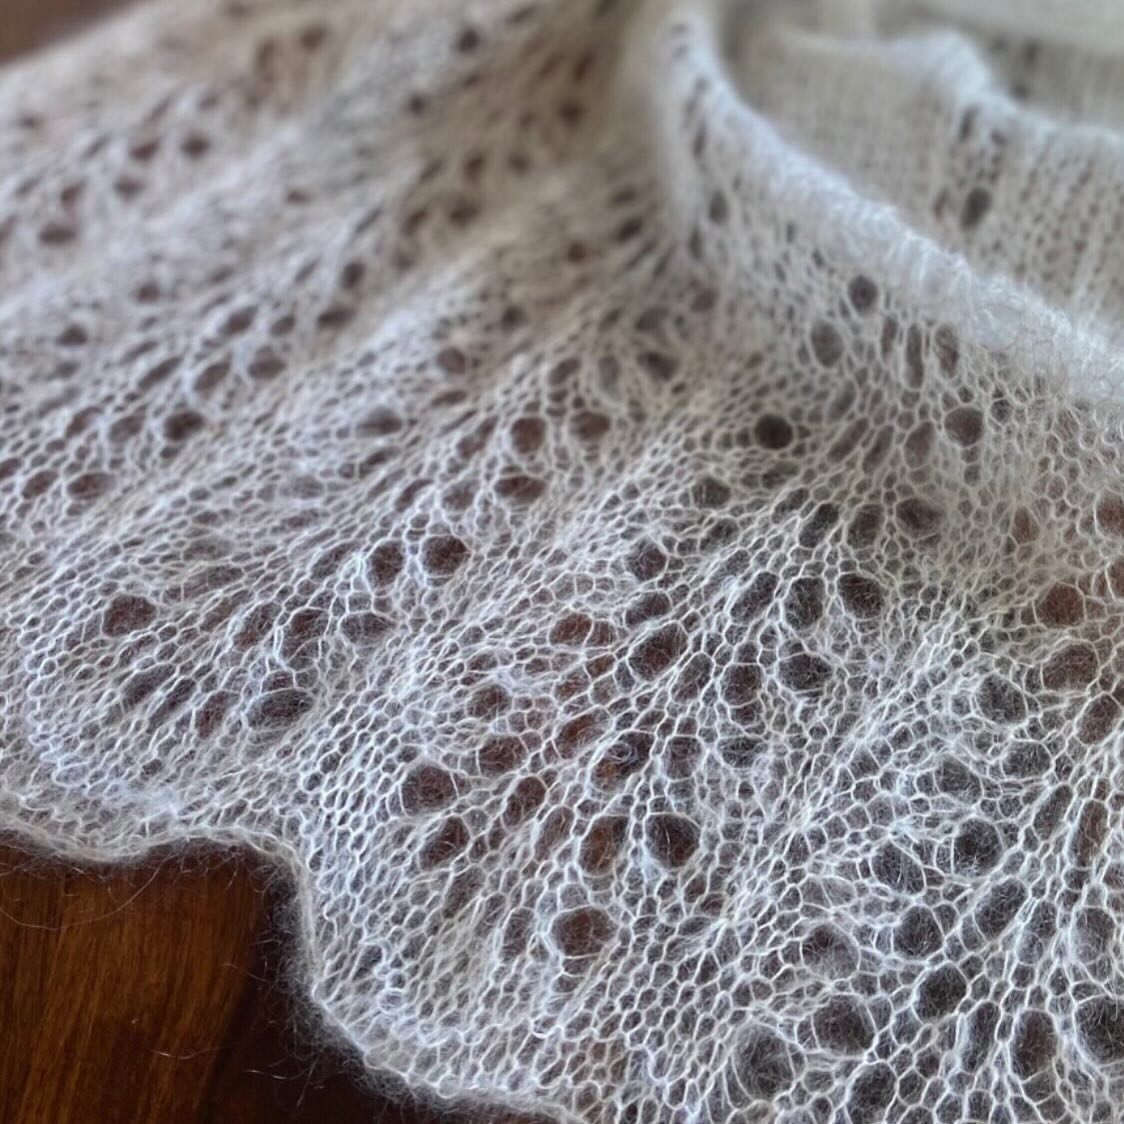 I&rsquo;ve started an Etsy shop!!! Working on getting my designs updated and moved over, but here is my very first listing!!! https://publicknitter.etsy.com/listing/1683447795 #knitting #indiedesigner #thepublicknitter #knittingpattern #laceknitting 